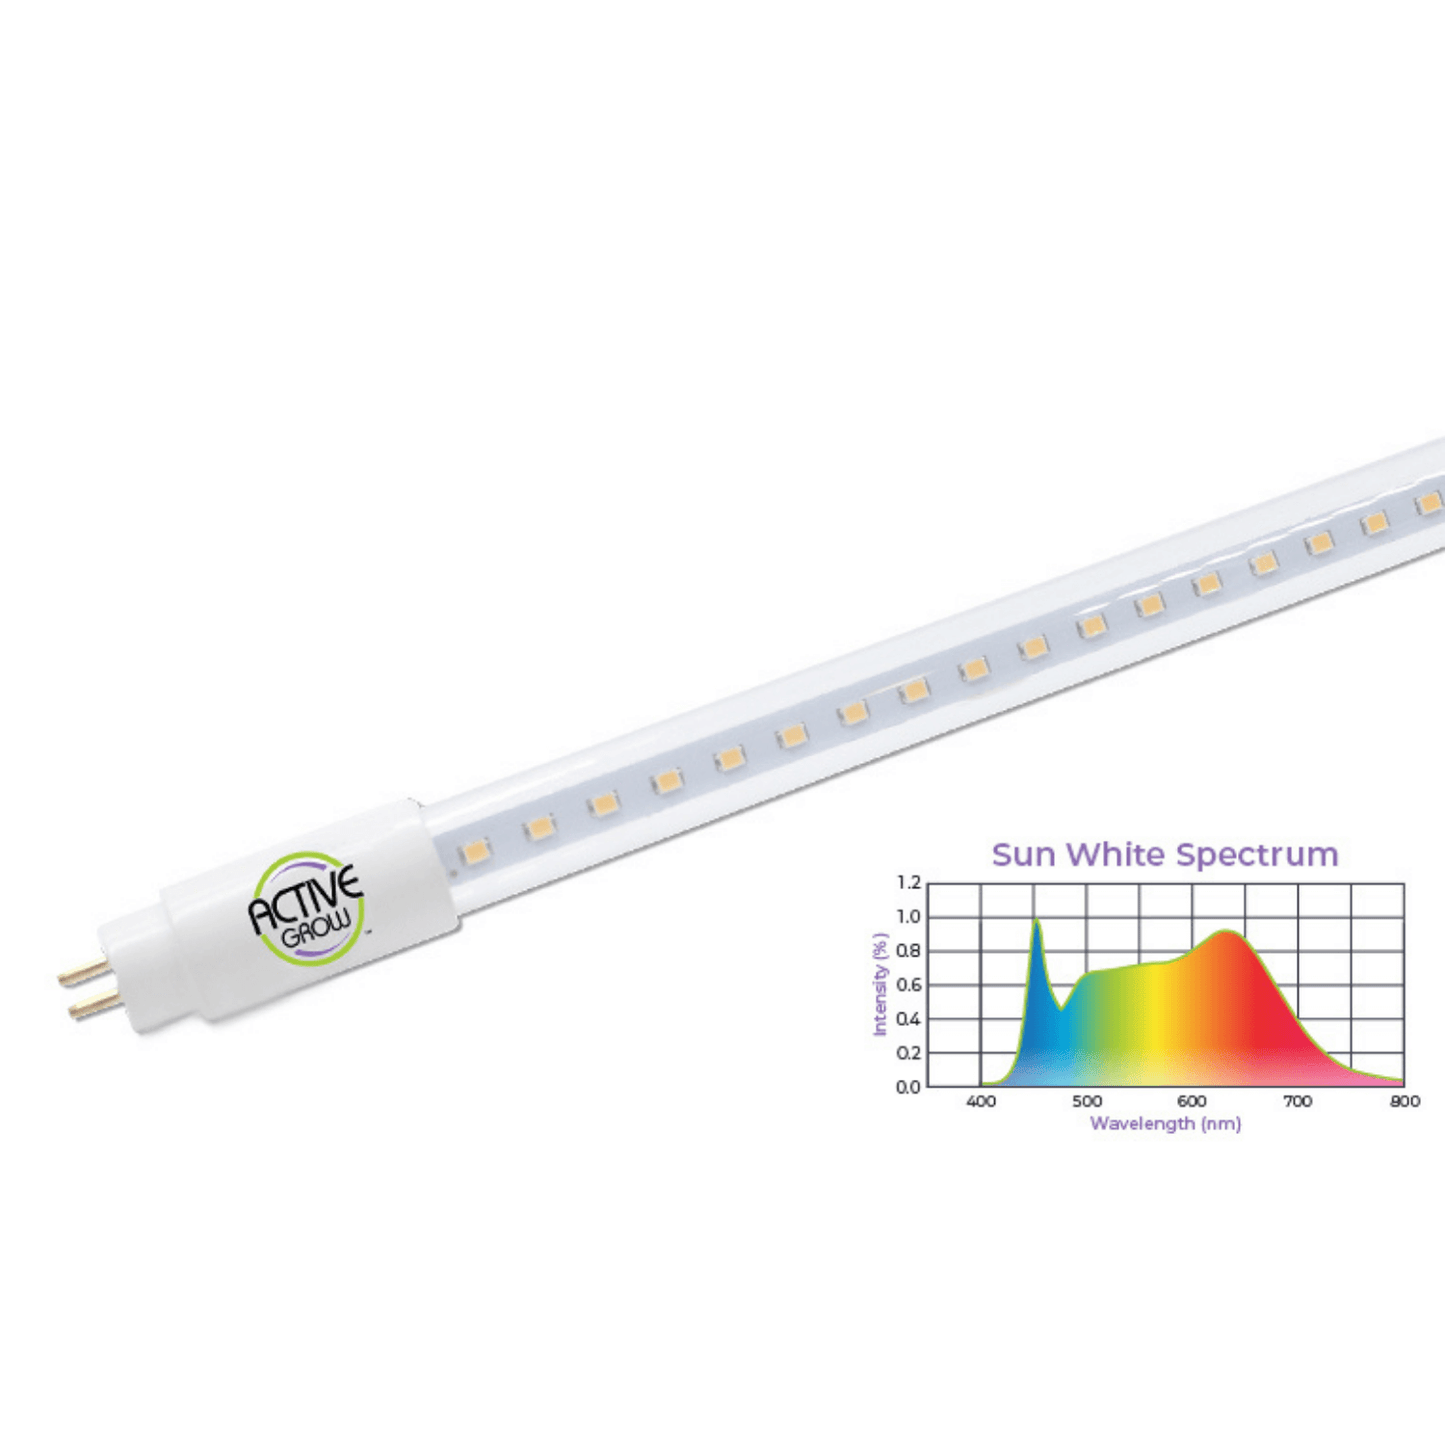 Active Grow 12W T5 HO 2FT Horticultural Lamp - Sun White Spectrum AG/12T5HO/2FT/WS/4 Grow Lights 752505498638